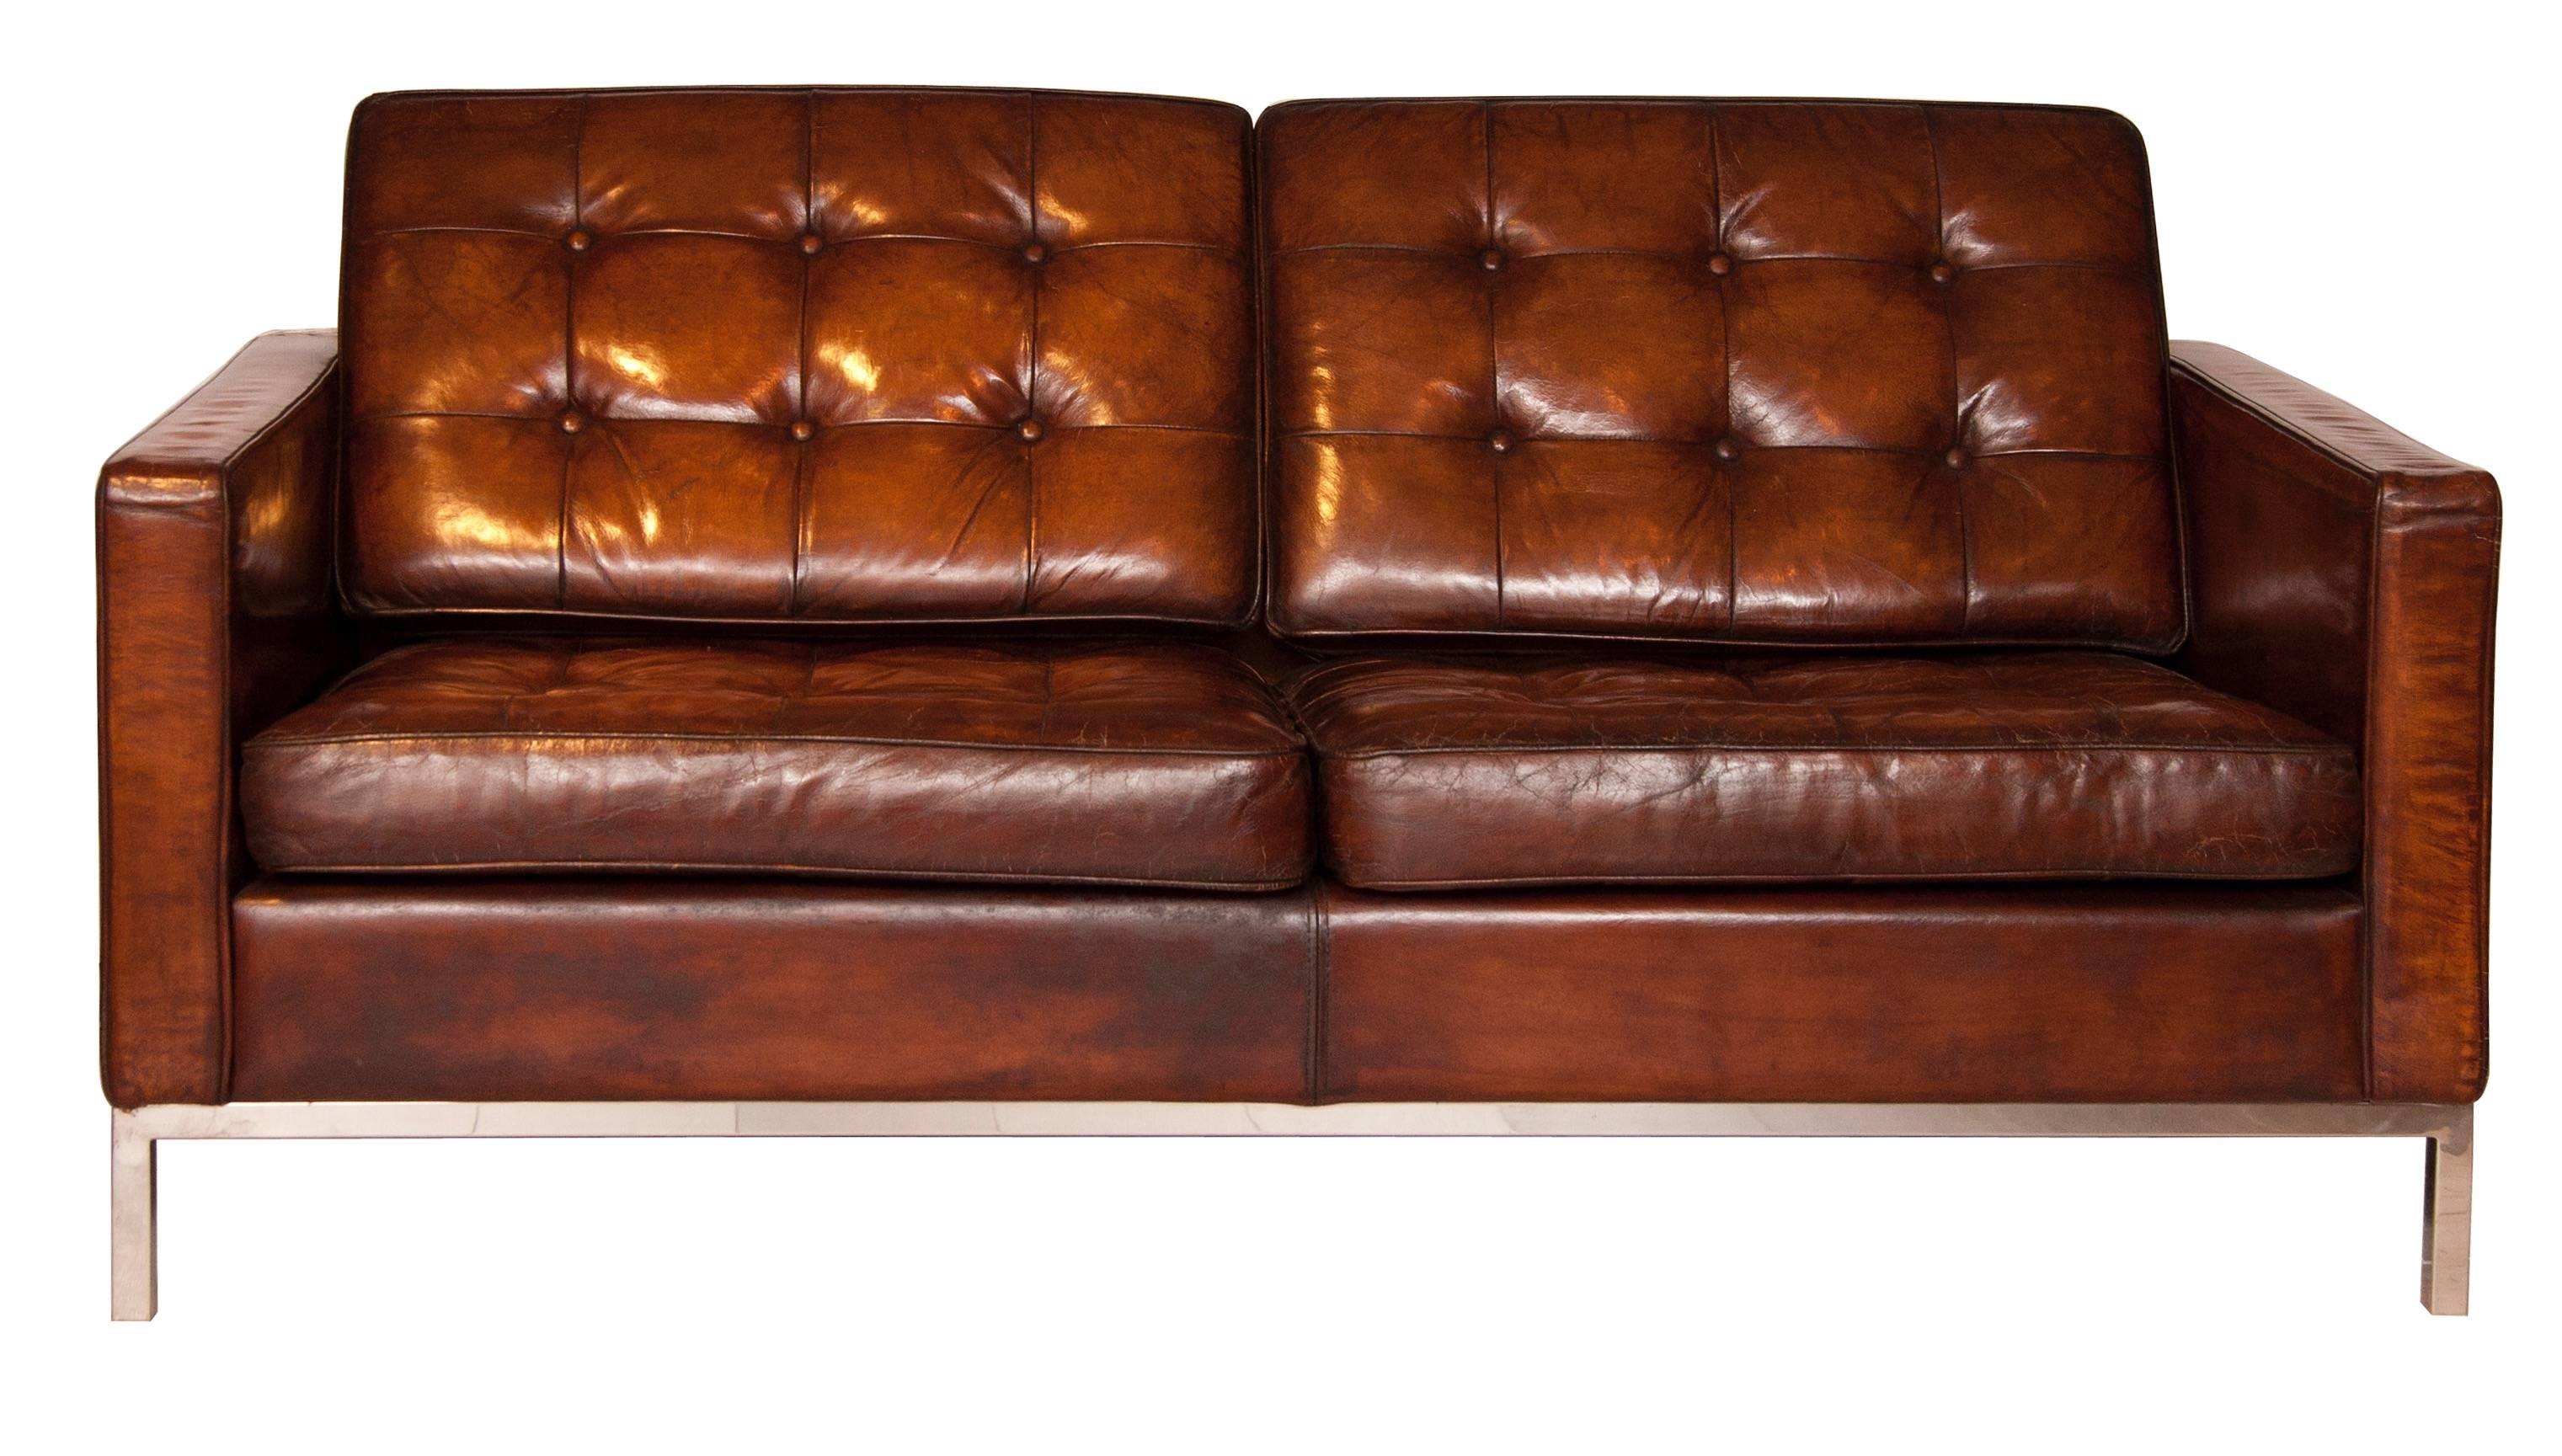 Mid-Century Modern design sofa.
Florence Knoll sofa.
This Classic two-seat settee was designed in 1954 as part of the Florence Knoll lounge collection.
Beautifully presented in original Havana leather.
Measures: 159 cm W 79 cm D 59 cm H to the